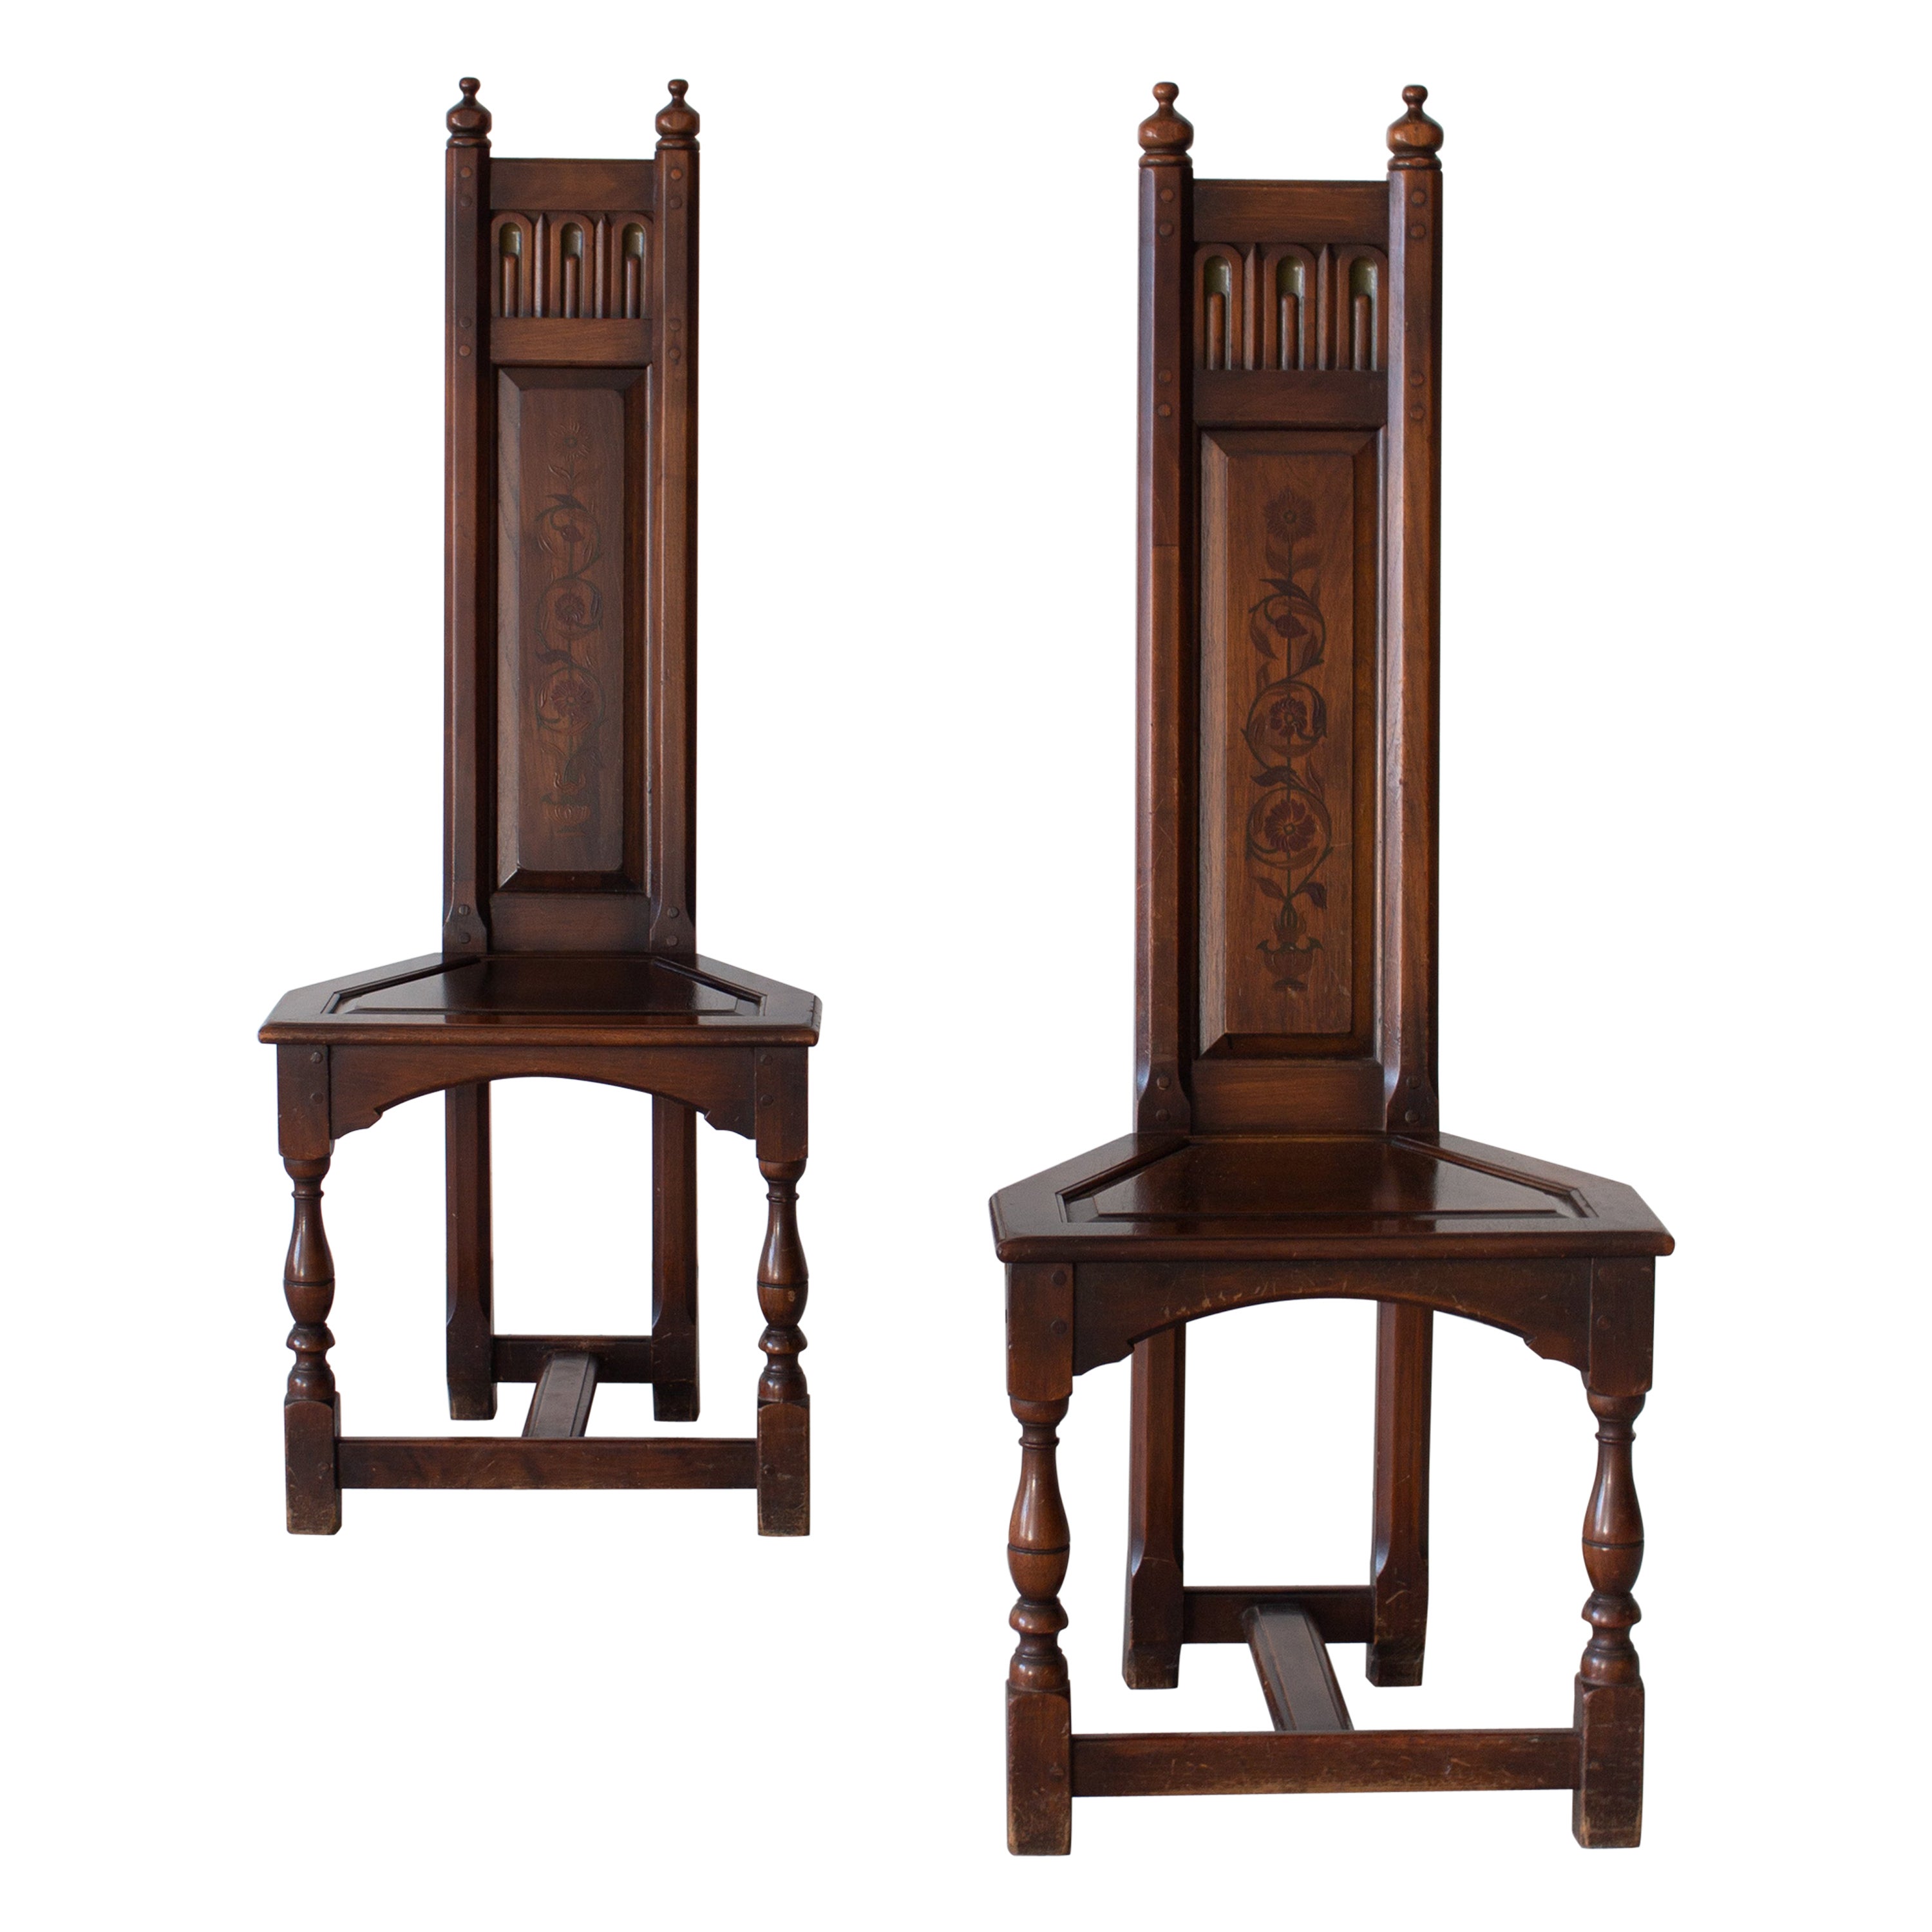 Pair of Gothic Revival Decorated Wooden Chairs by Kittinger For Sale